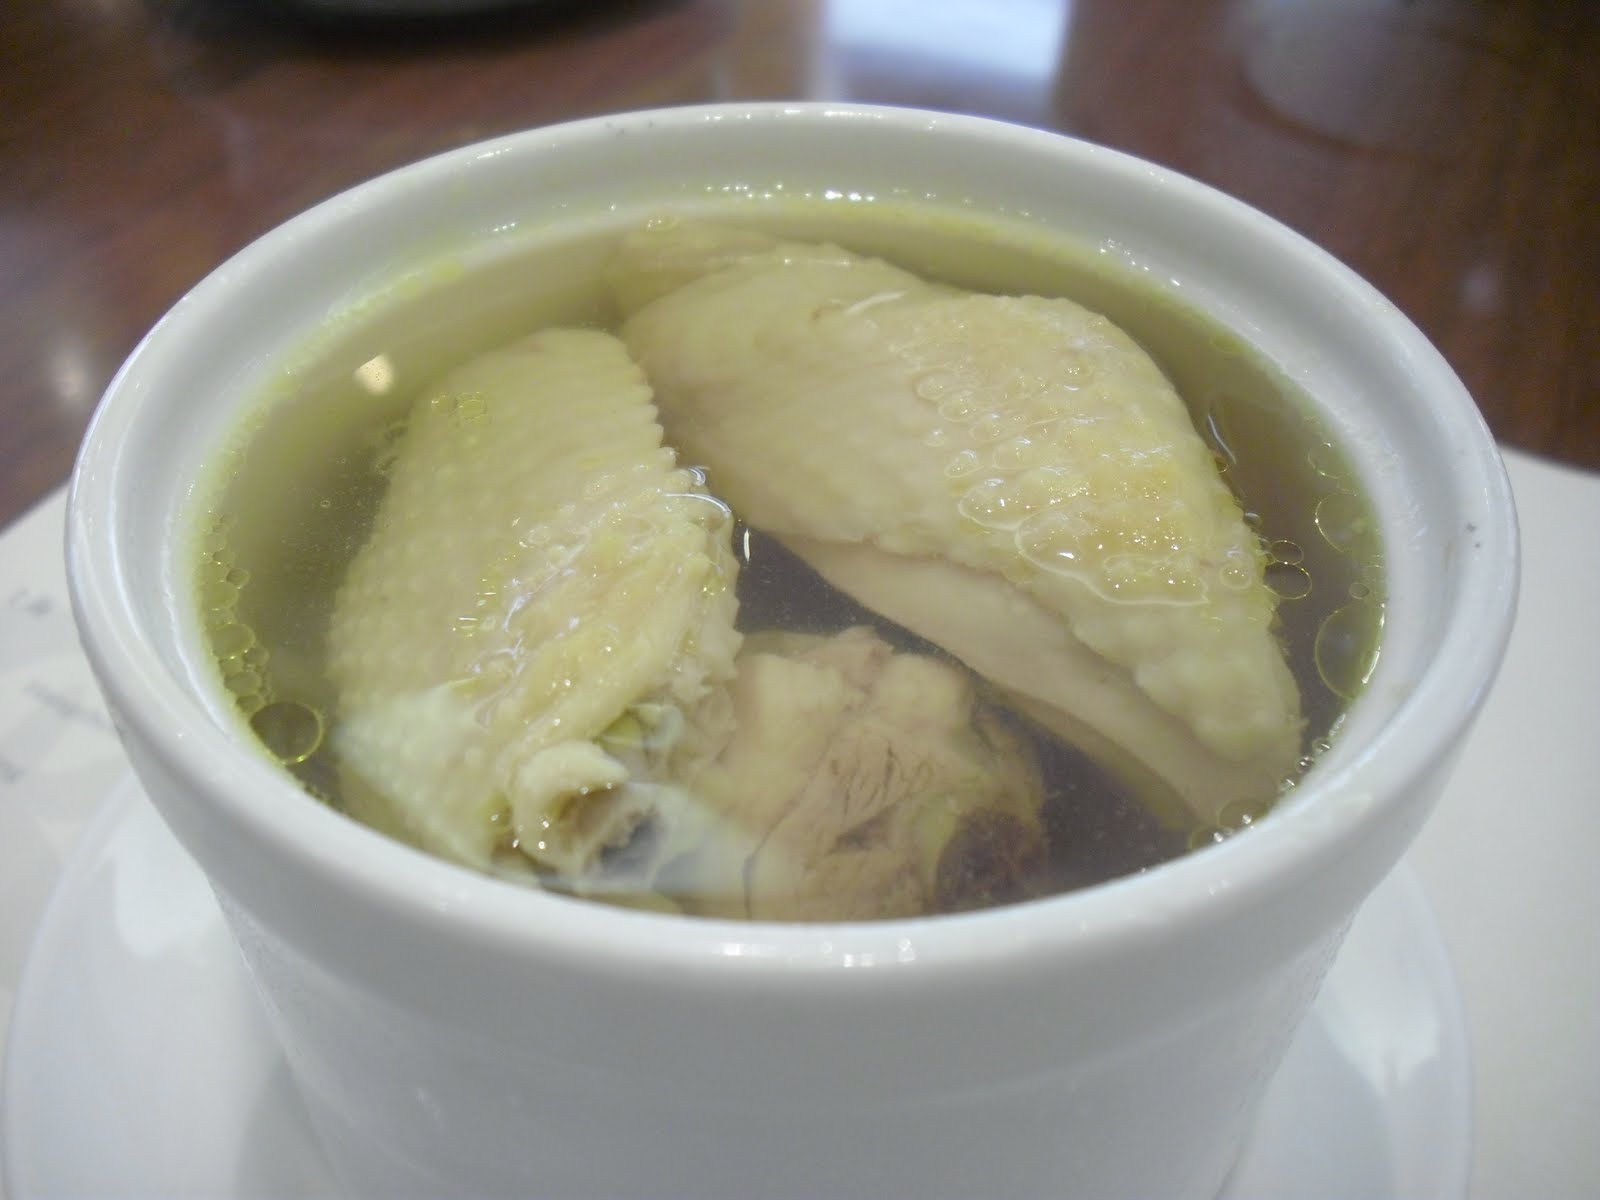 House Chicken Soup (Steamed) – Very simple soup, with steamed chicken. Nice and refreshing. Made me sweat a lot though.